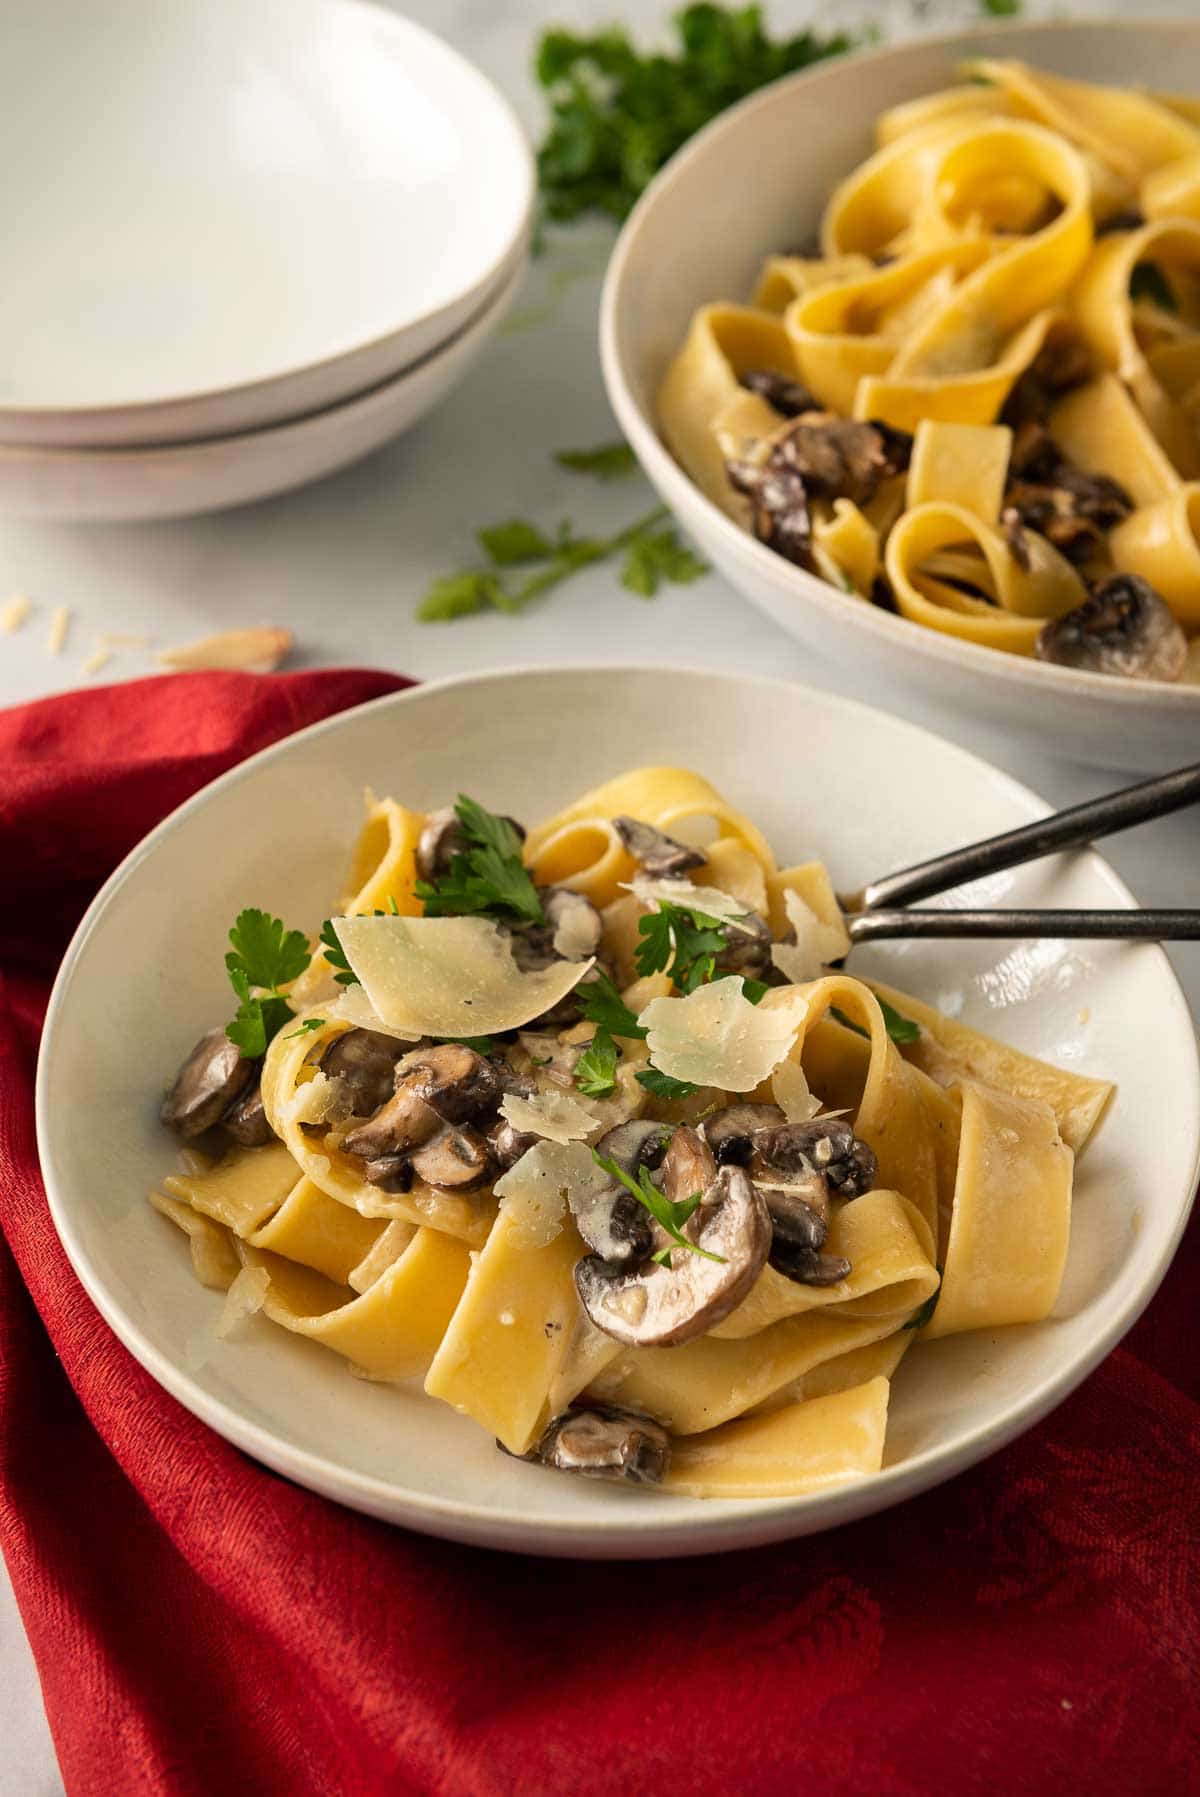 A plate of creamy mushroom pappardelle pasta that's ready to eat next to a serving bowl and some empty pasta bowls.